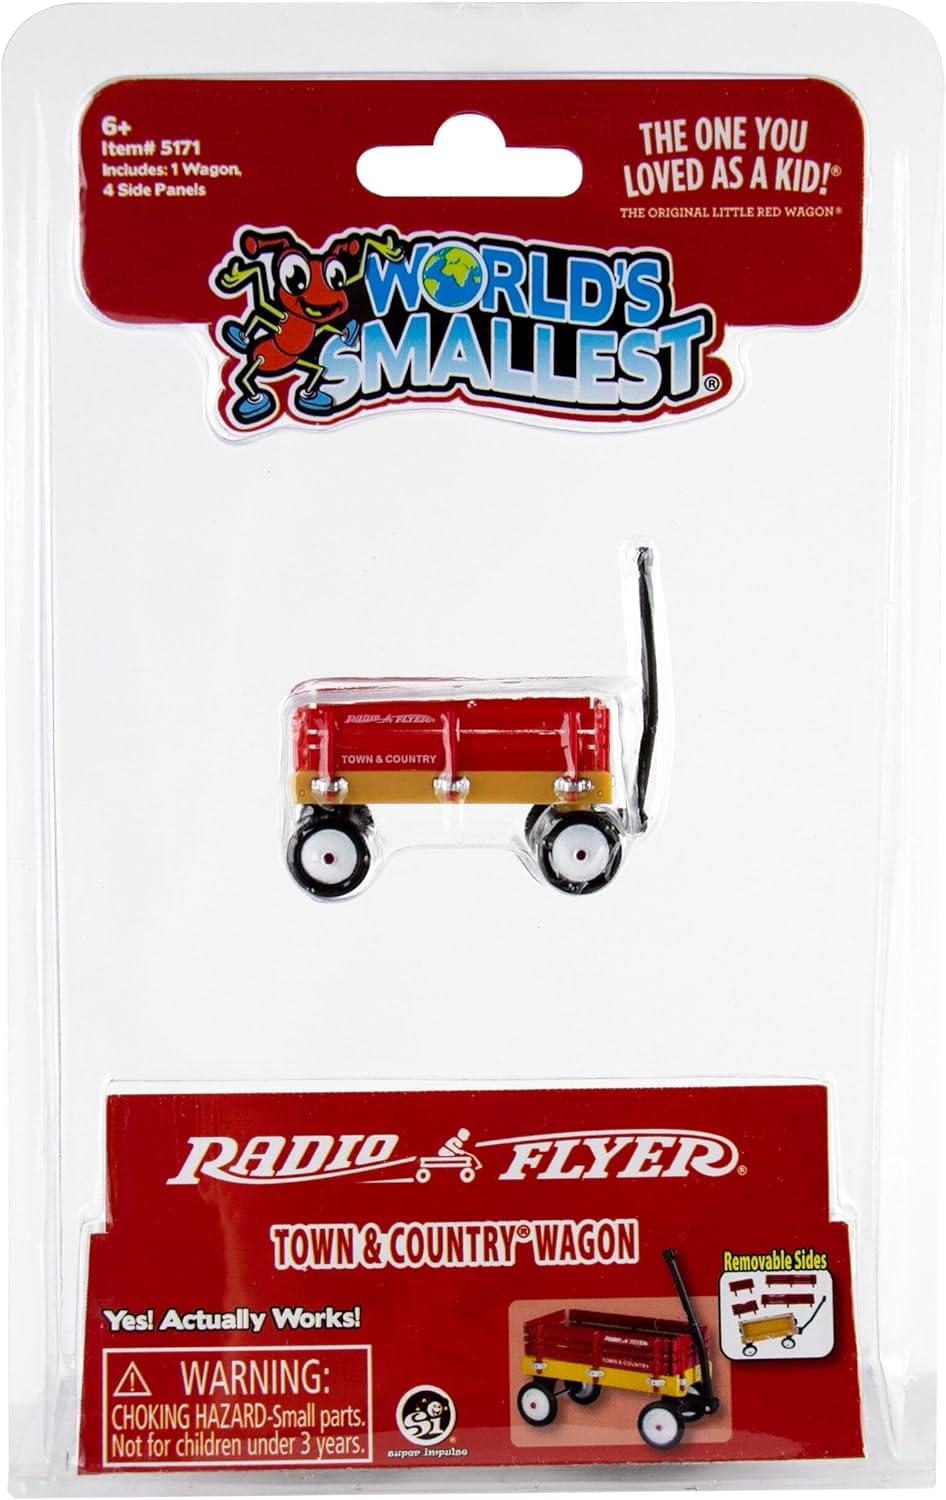 World's Smallest Radio Flyer Town & Country Wagon Toy